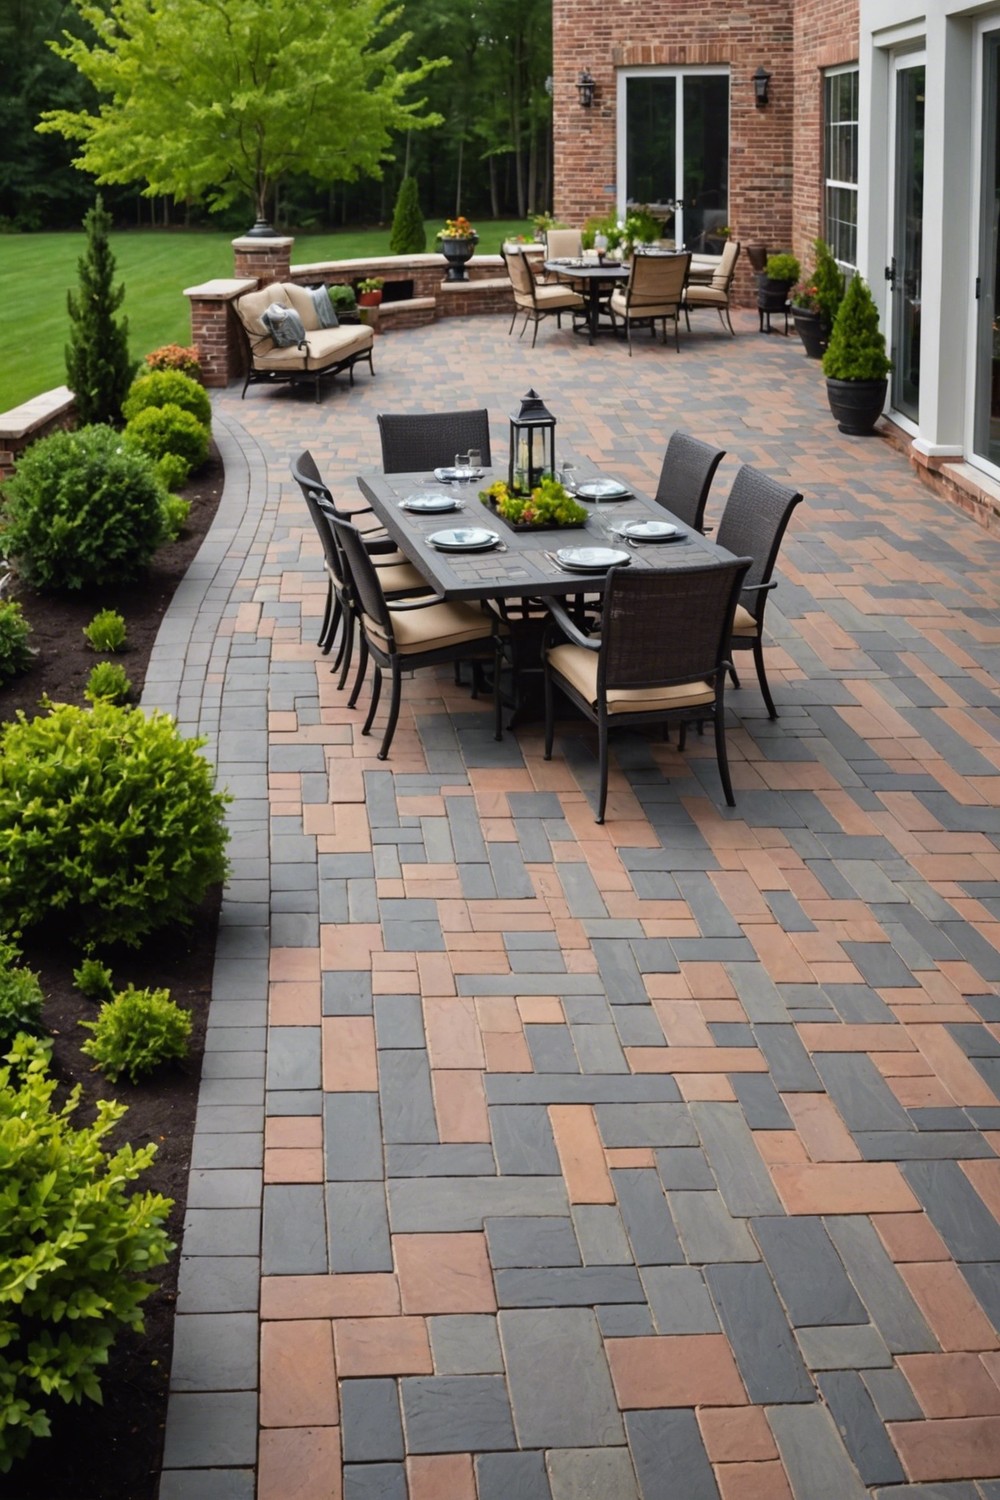 Paver Patterns for a Visually Interesting Patio